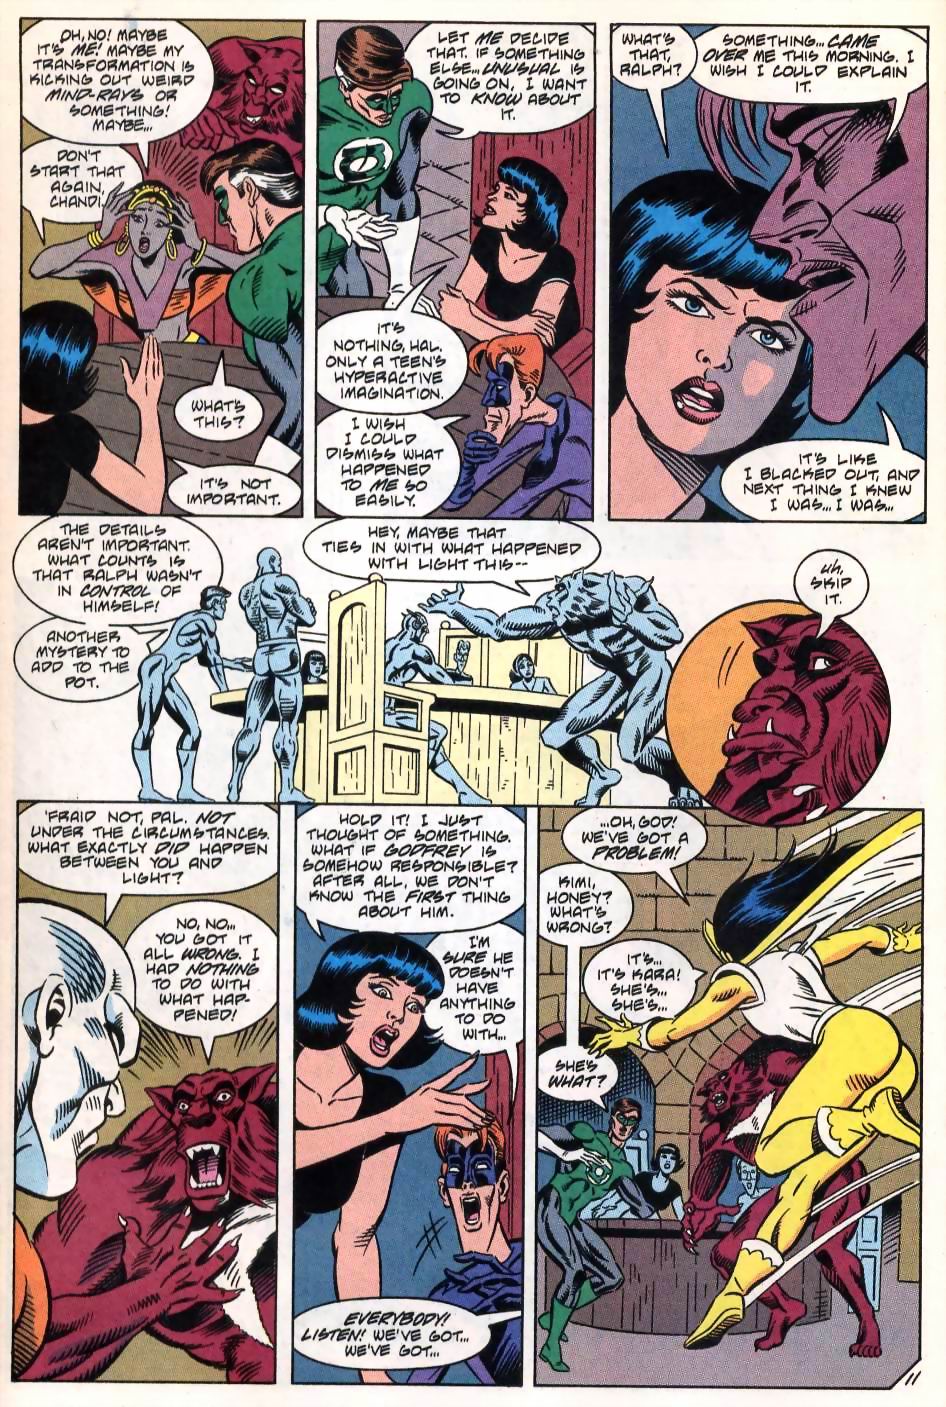 Justice League International (1993) 54 Page 11